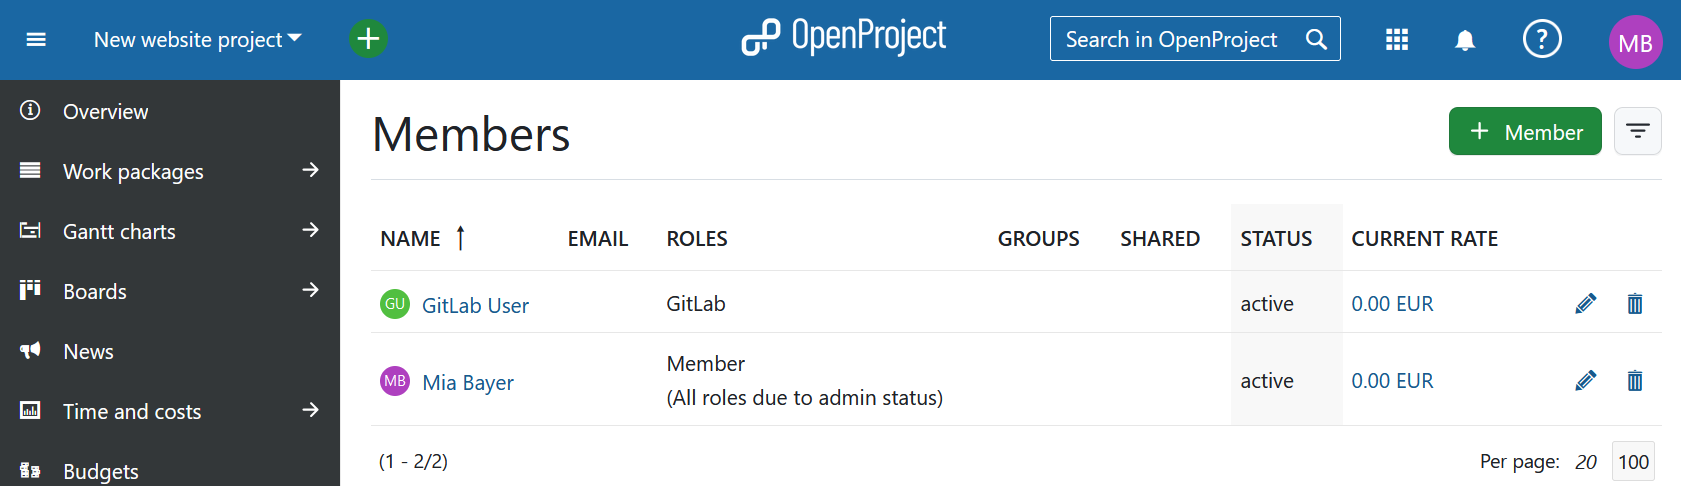 GitLab user added as member to project with respective role